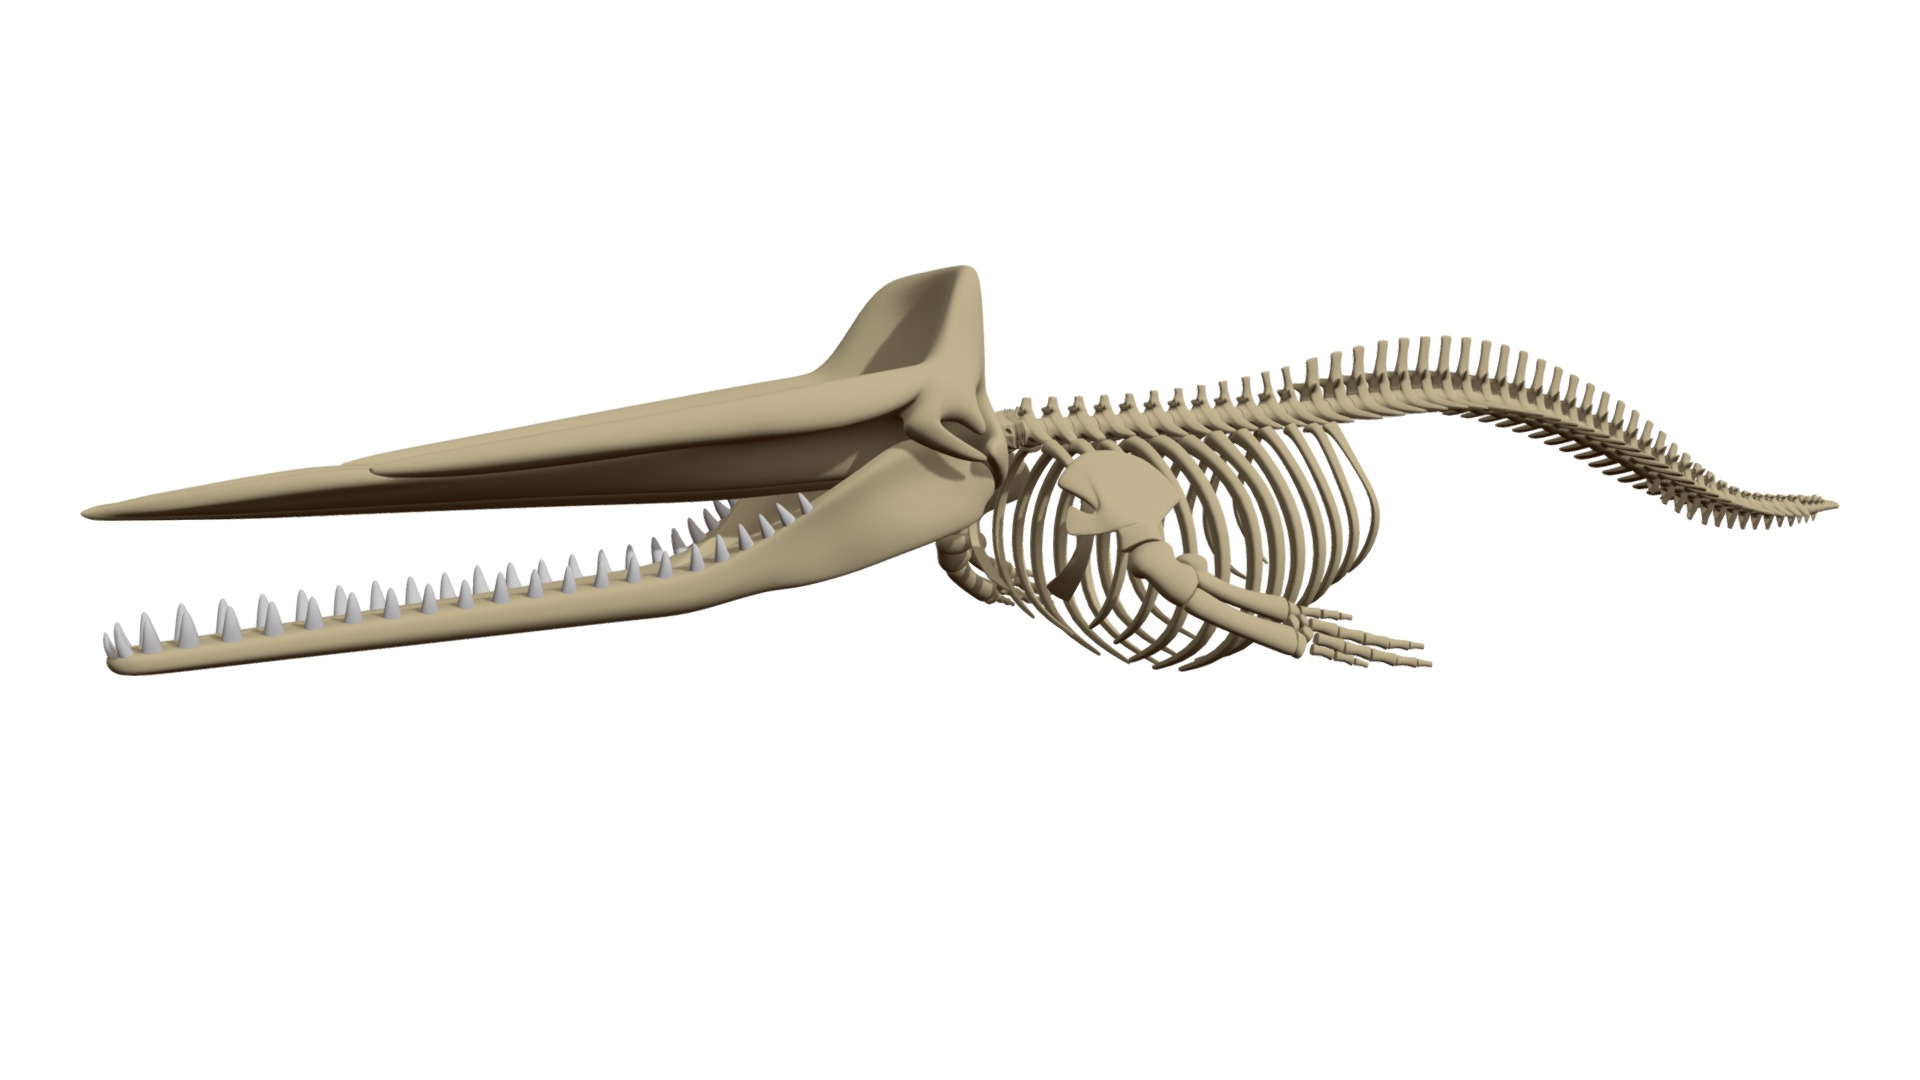 3D model Sperm Whale Skeleton - This is a 3D model of the Sperm Whale Skeleton. The 3D model is about a silver and black sword.